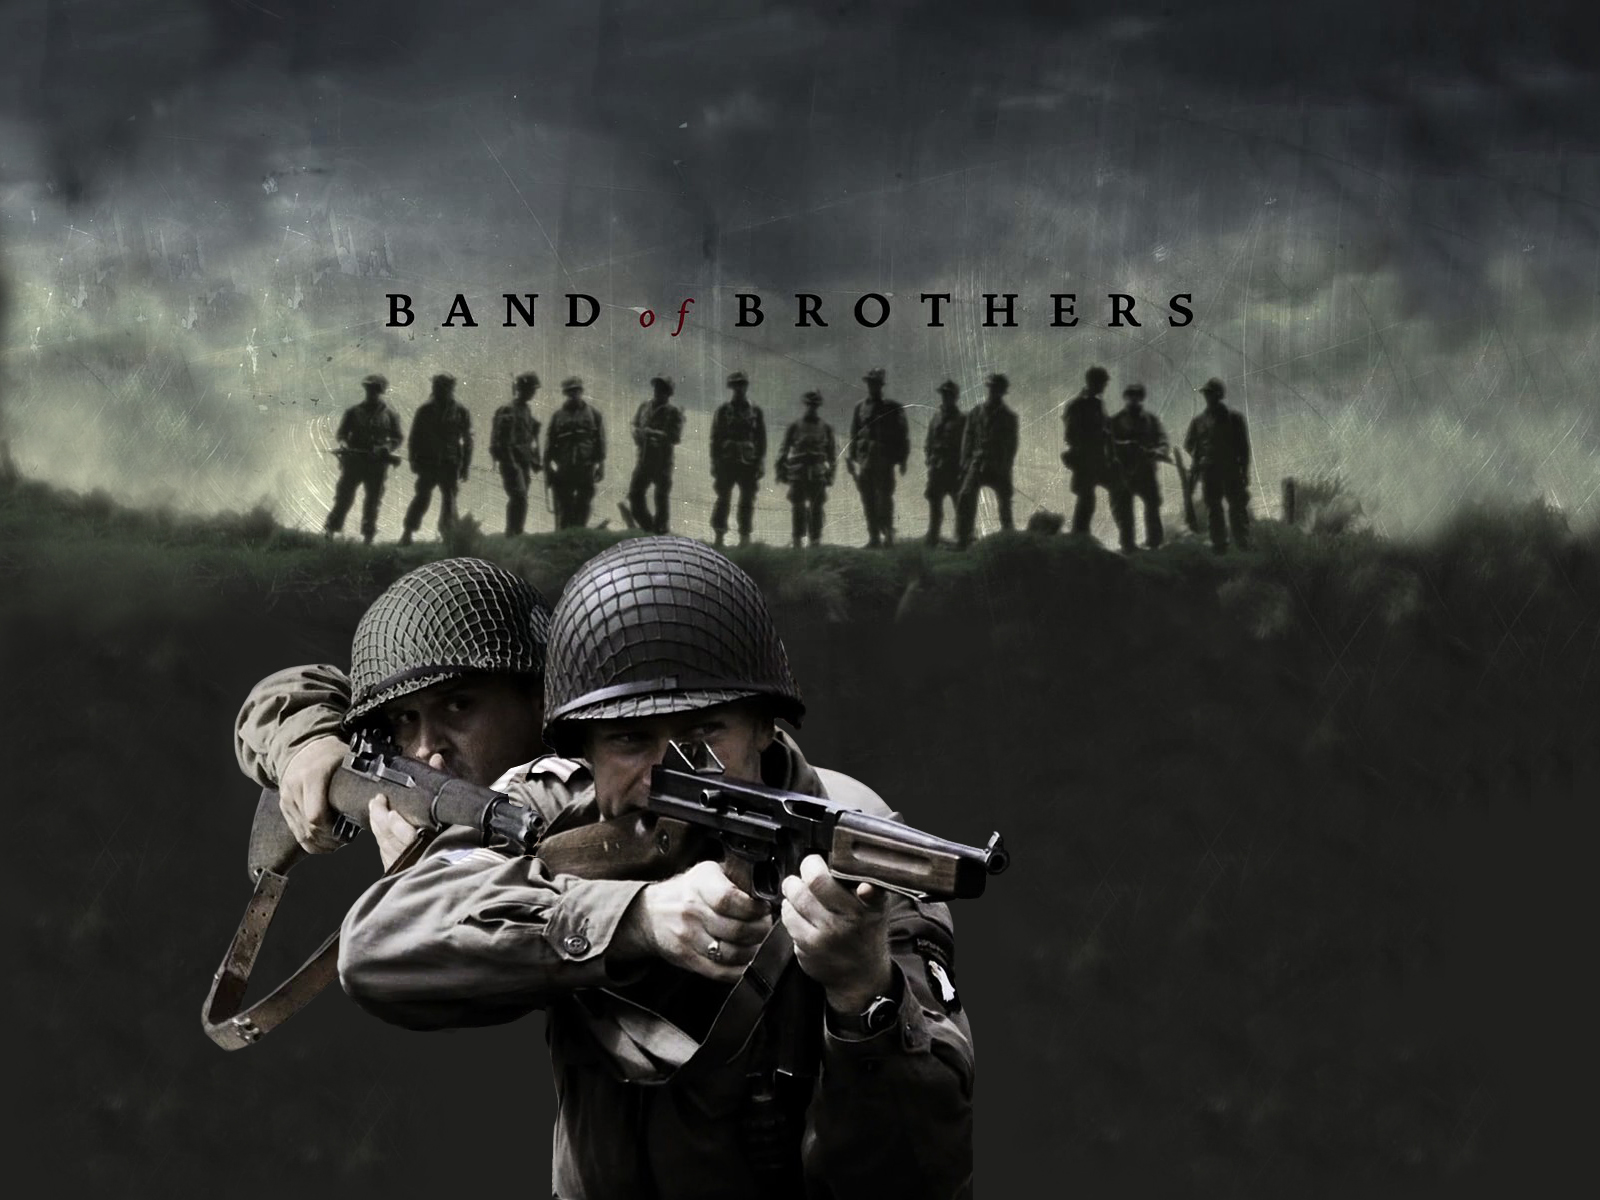 BAND OF BROTHERS by ~SjoerdB on deviantART